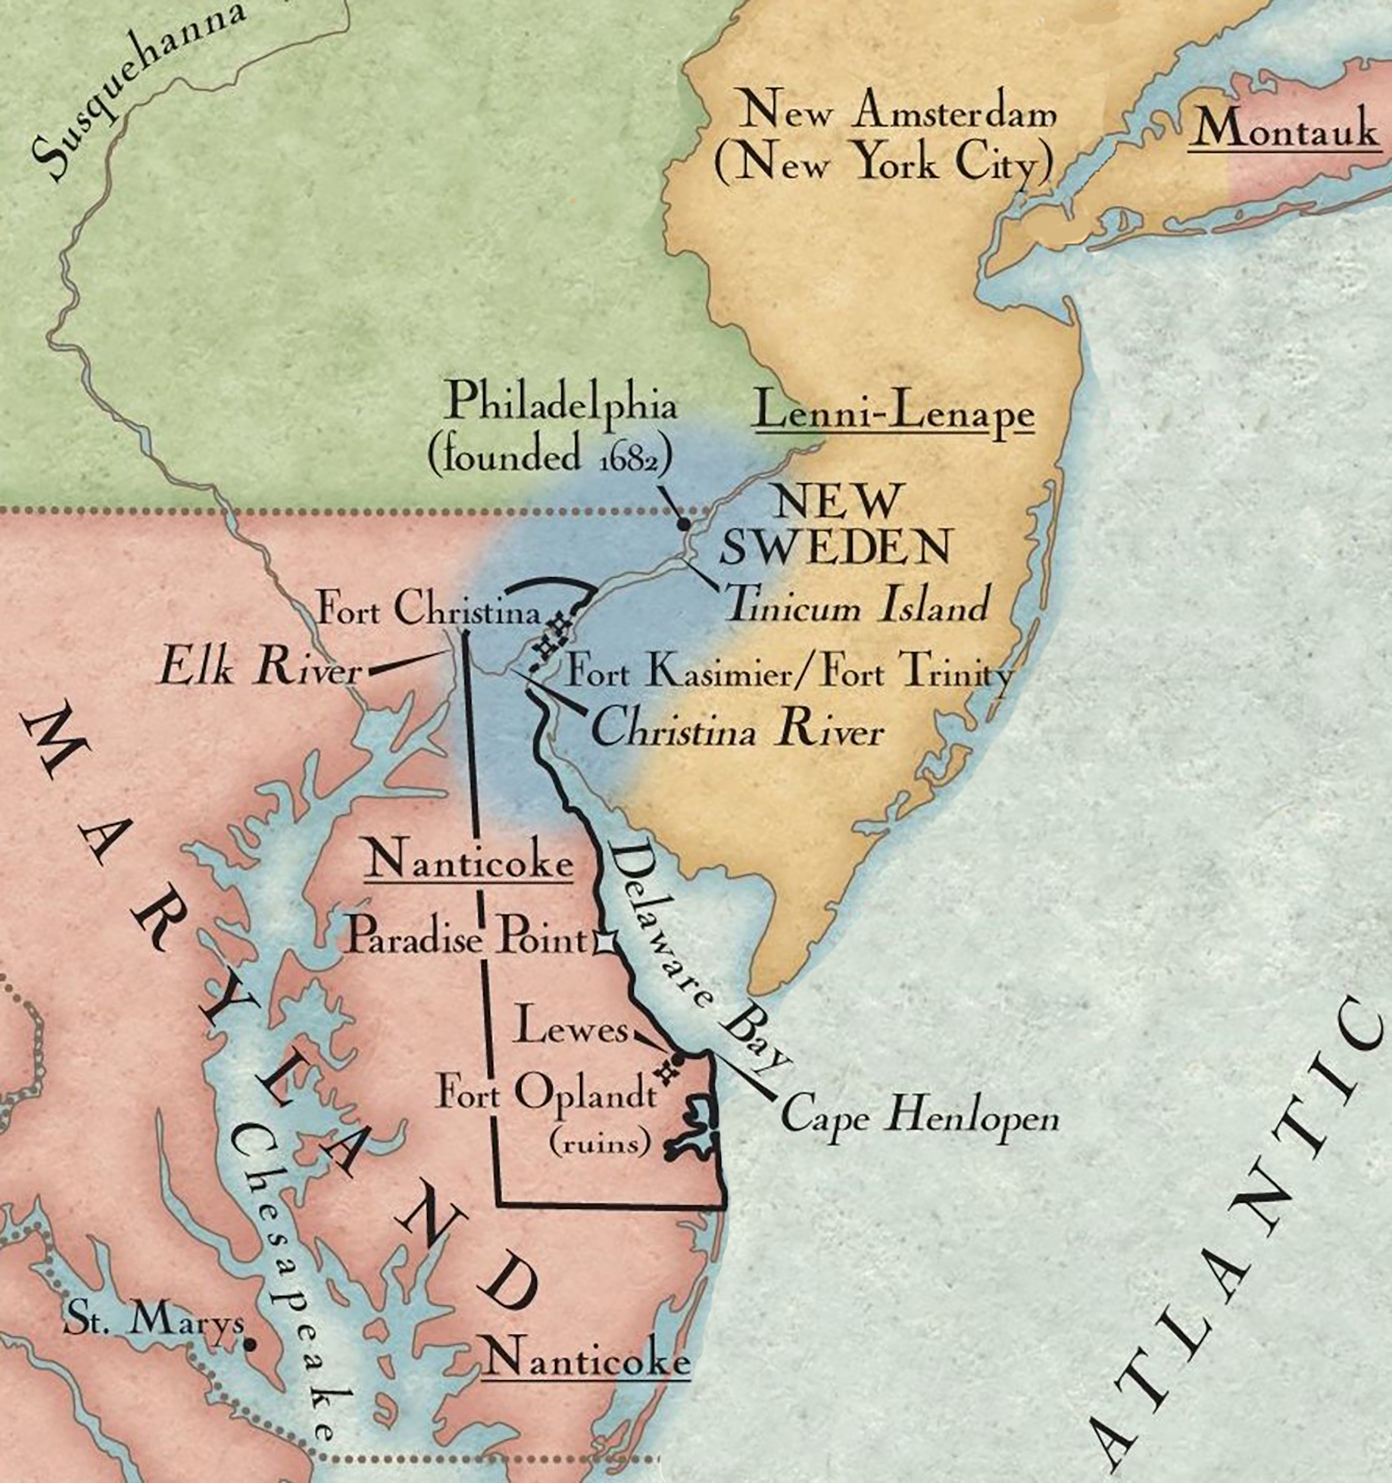 The Rise and Fall of New Netherland - Martin Van Buren National Historic Site (U.S. National Park Service)